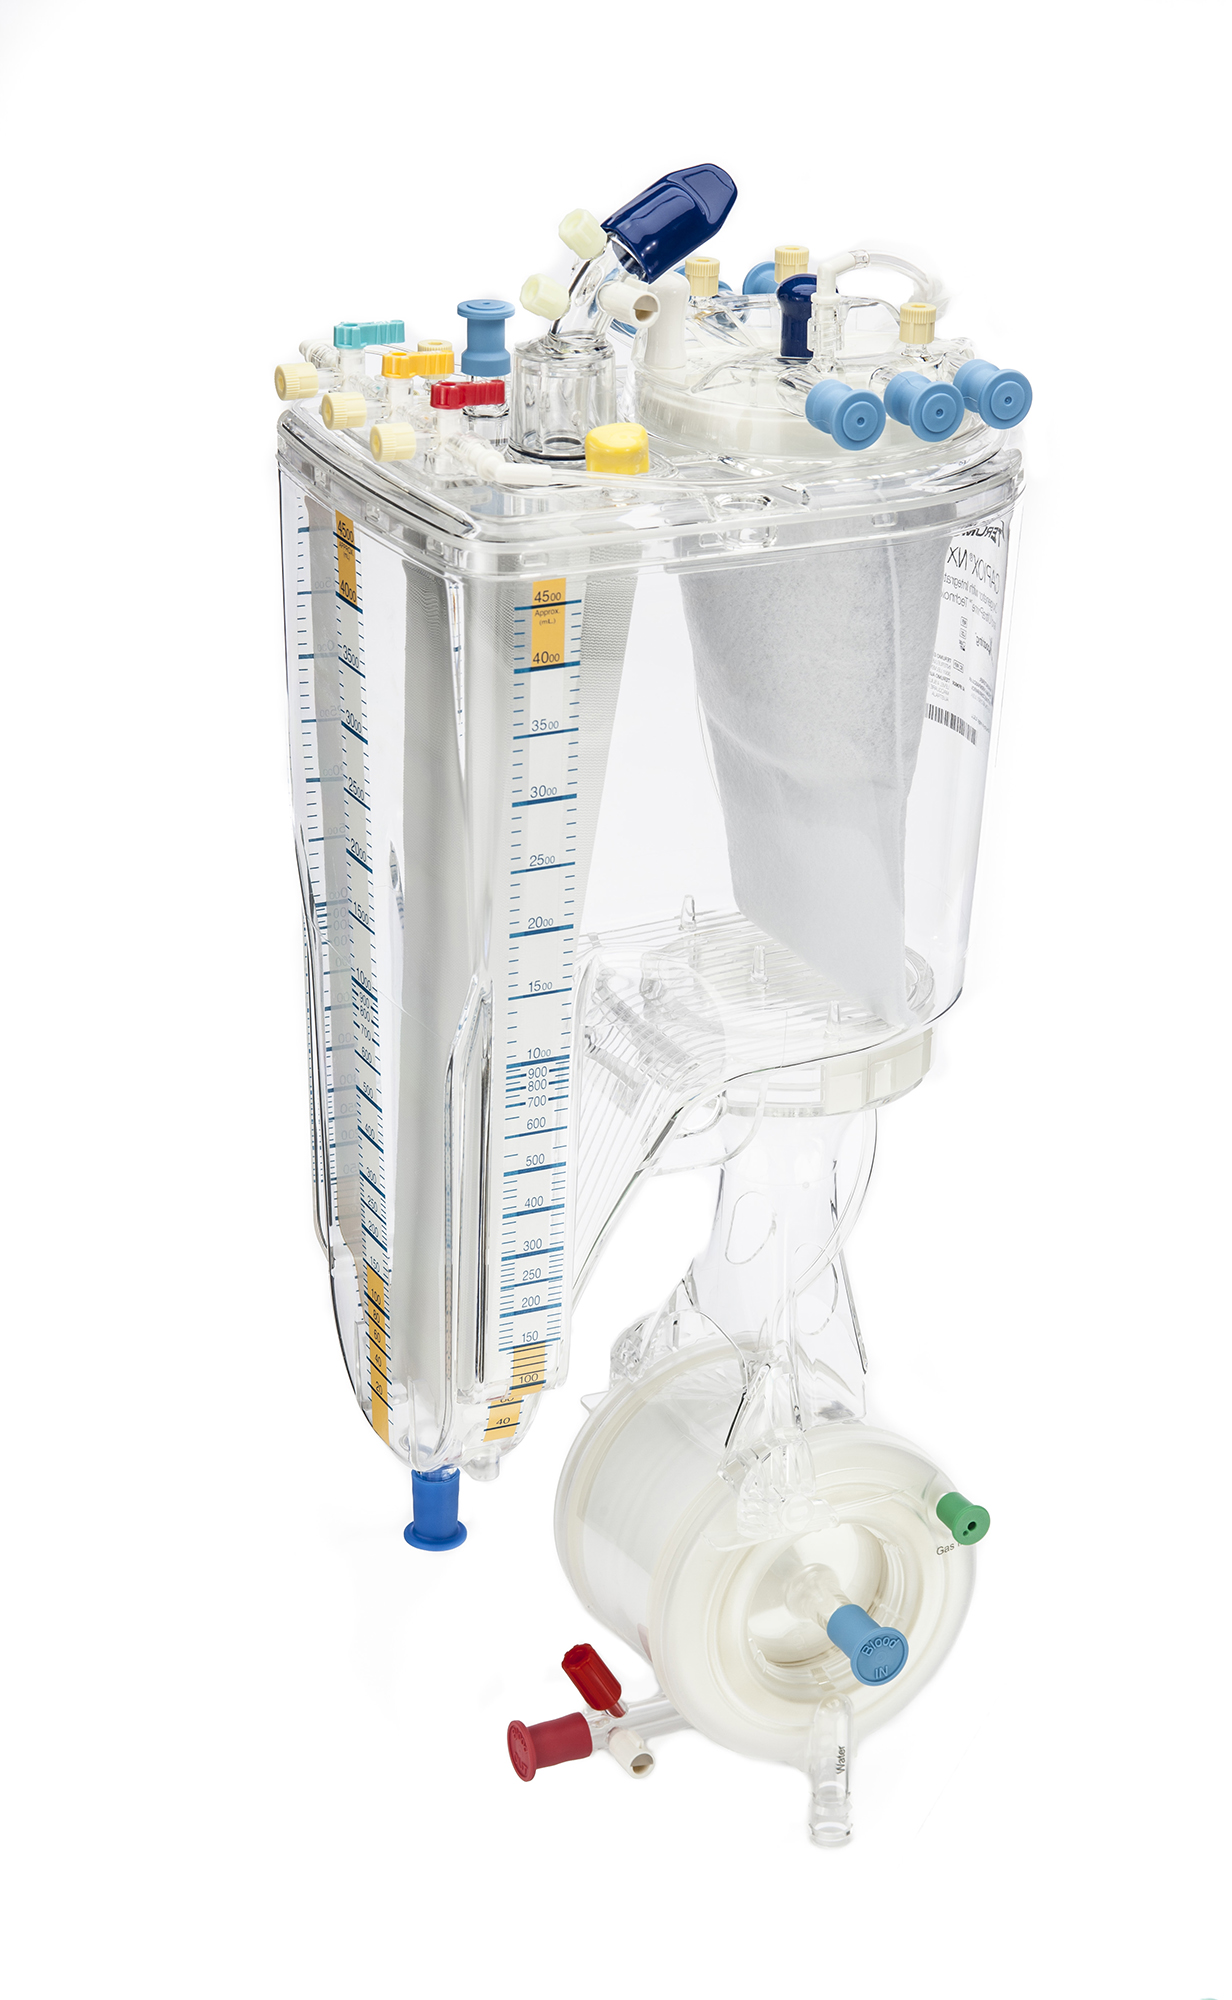 CAPIOX NX19 Oxygenator with Integrated Arterial Filter and UltraPrime Technology